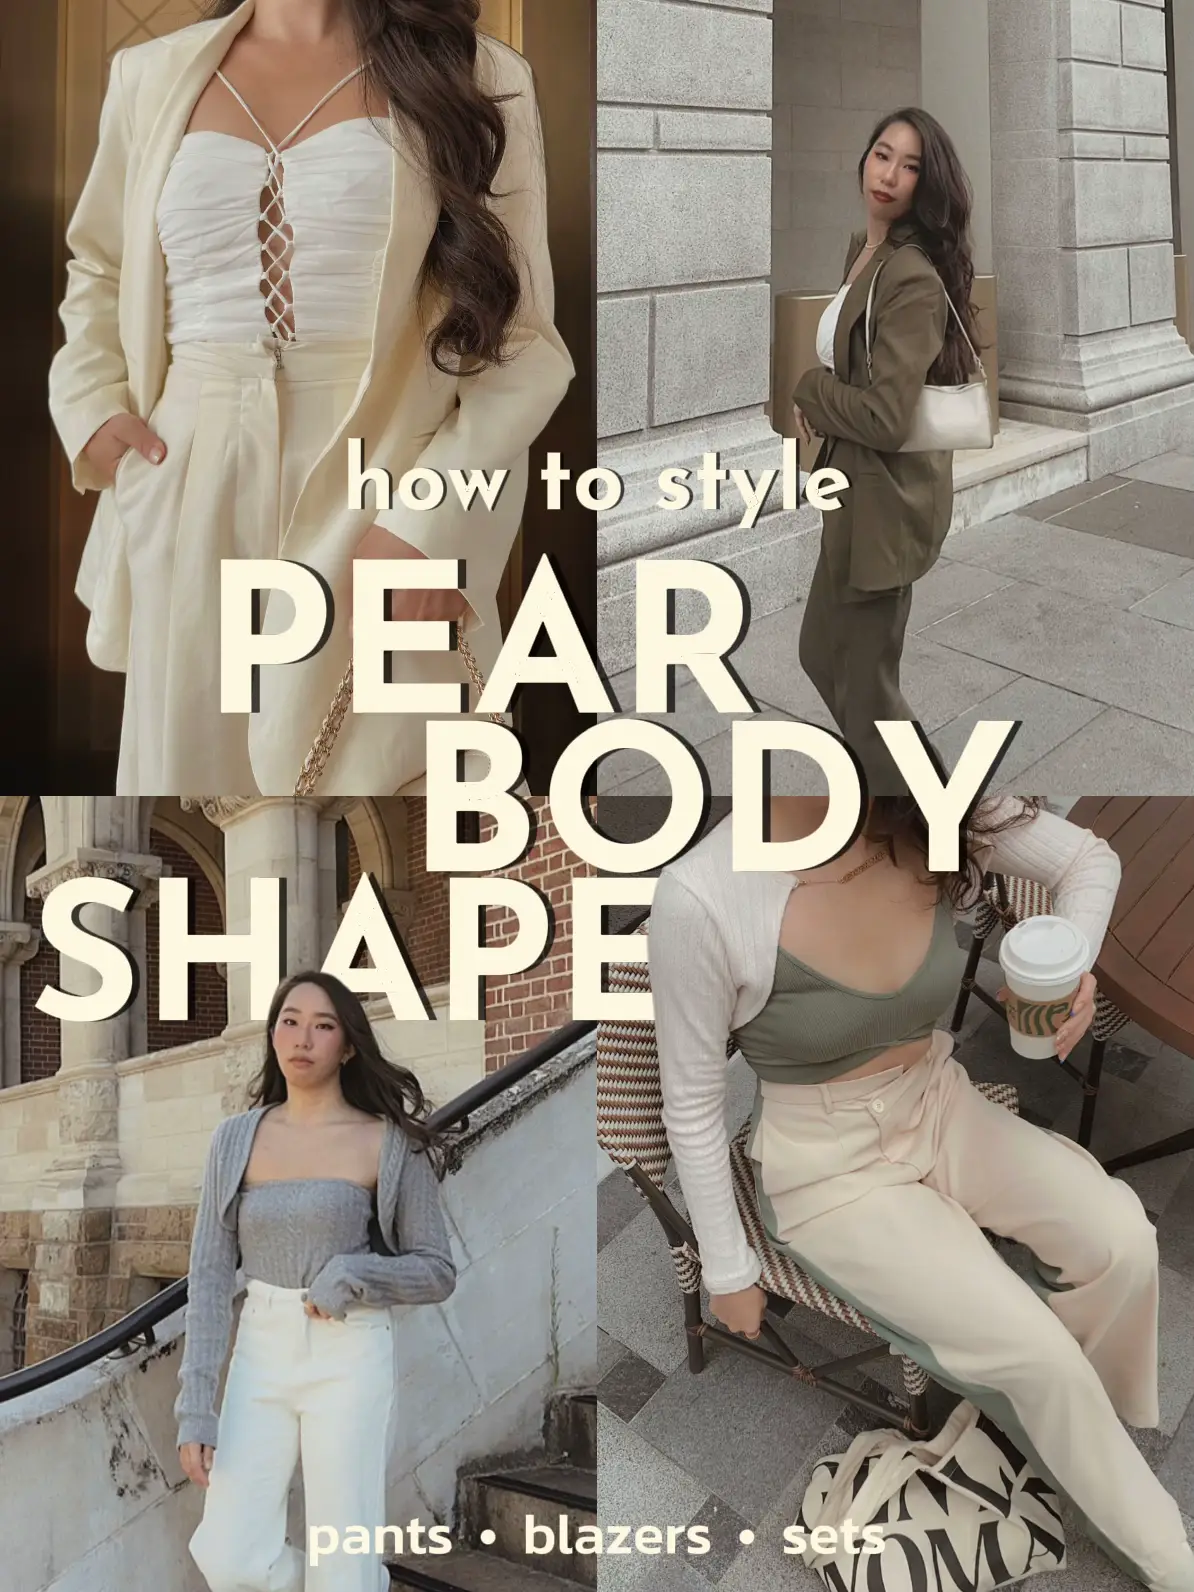 HOW TO STYLE A PEAR-SHAPED BODY 🍐 PT. 2, Gallery posted by Eve 🌿